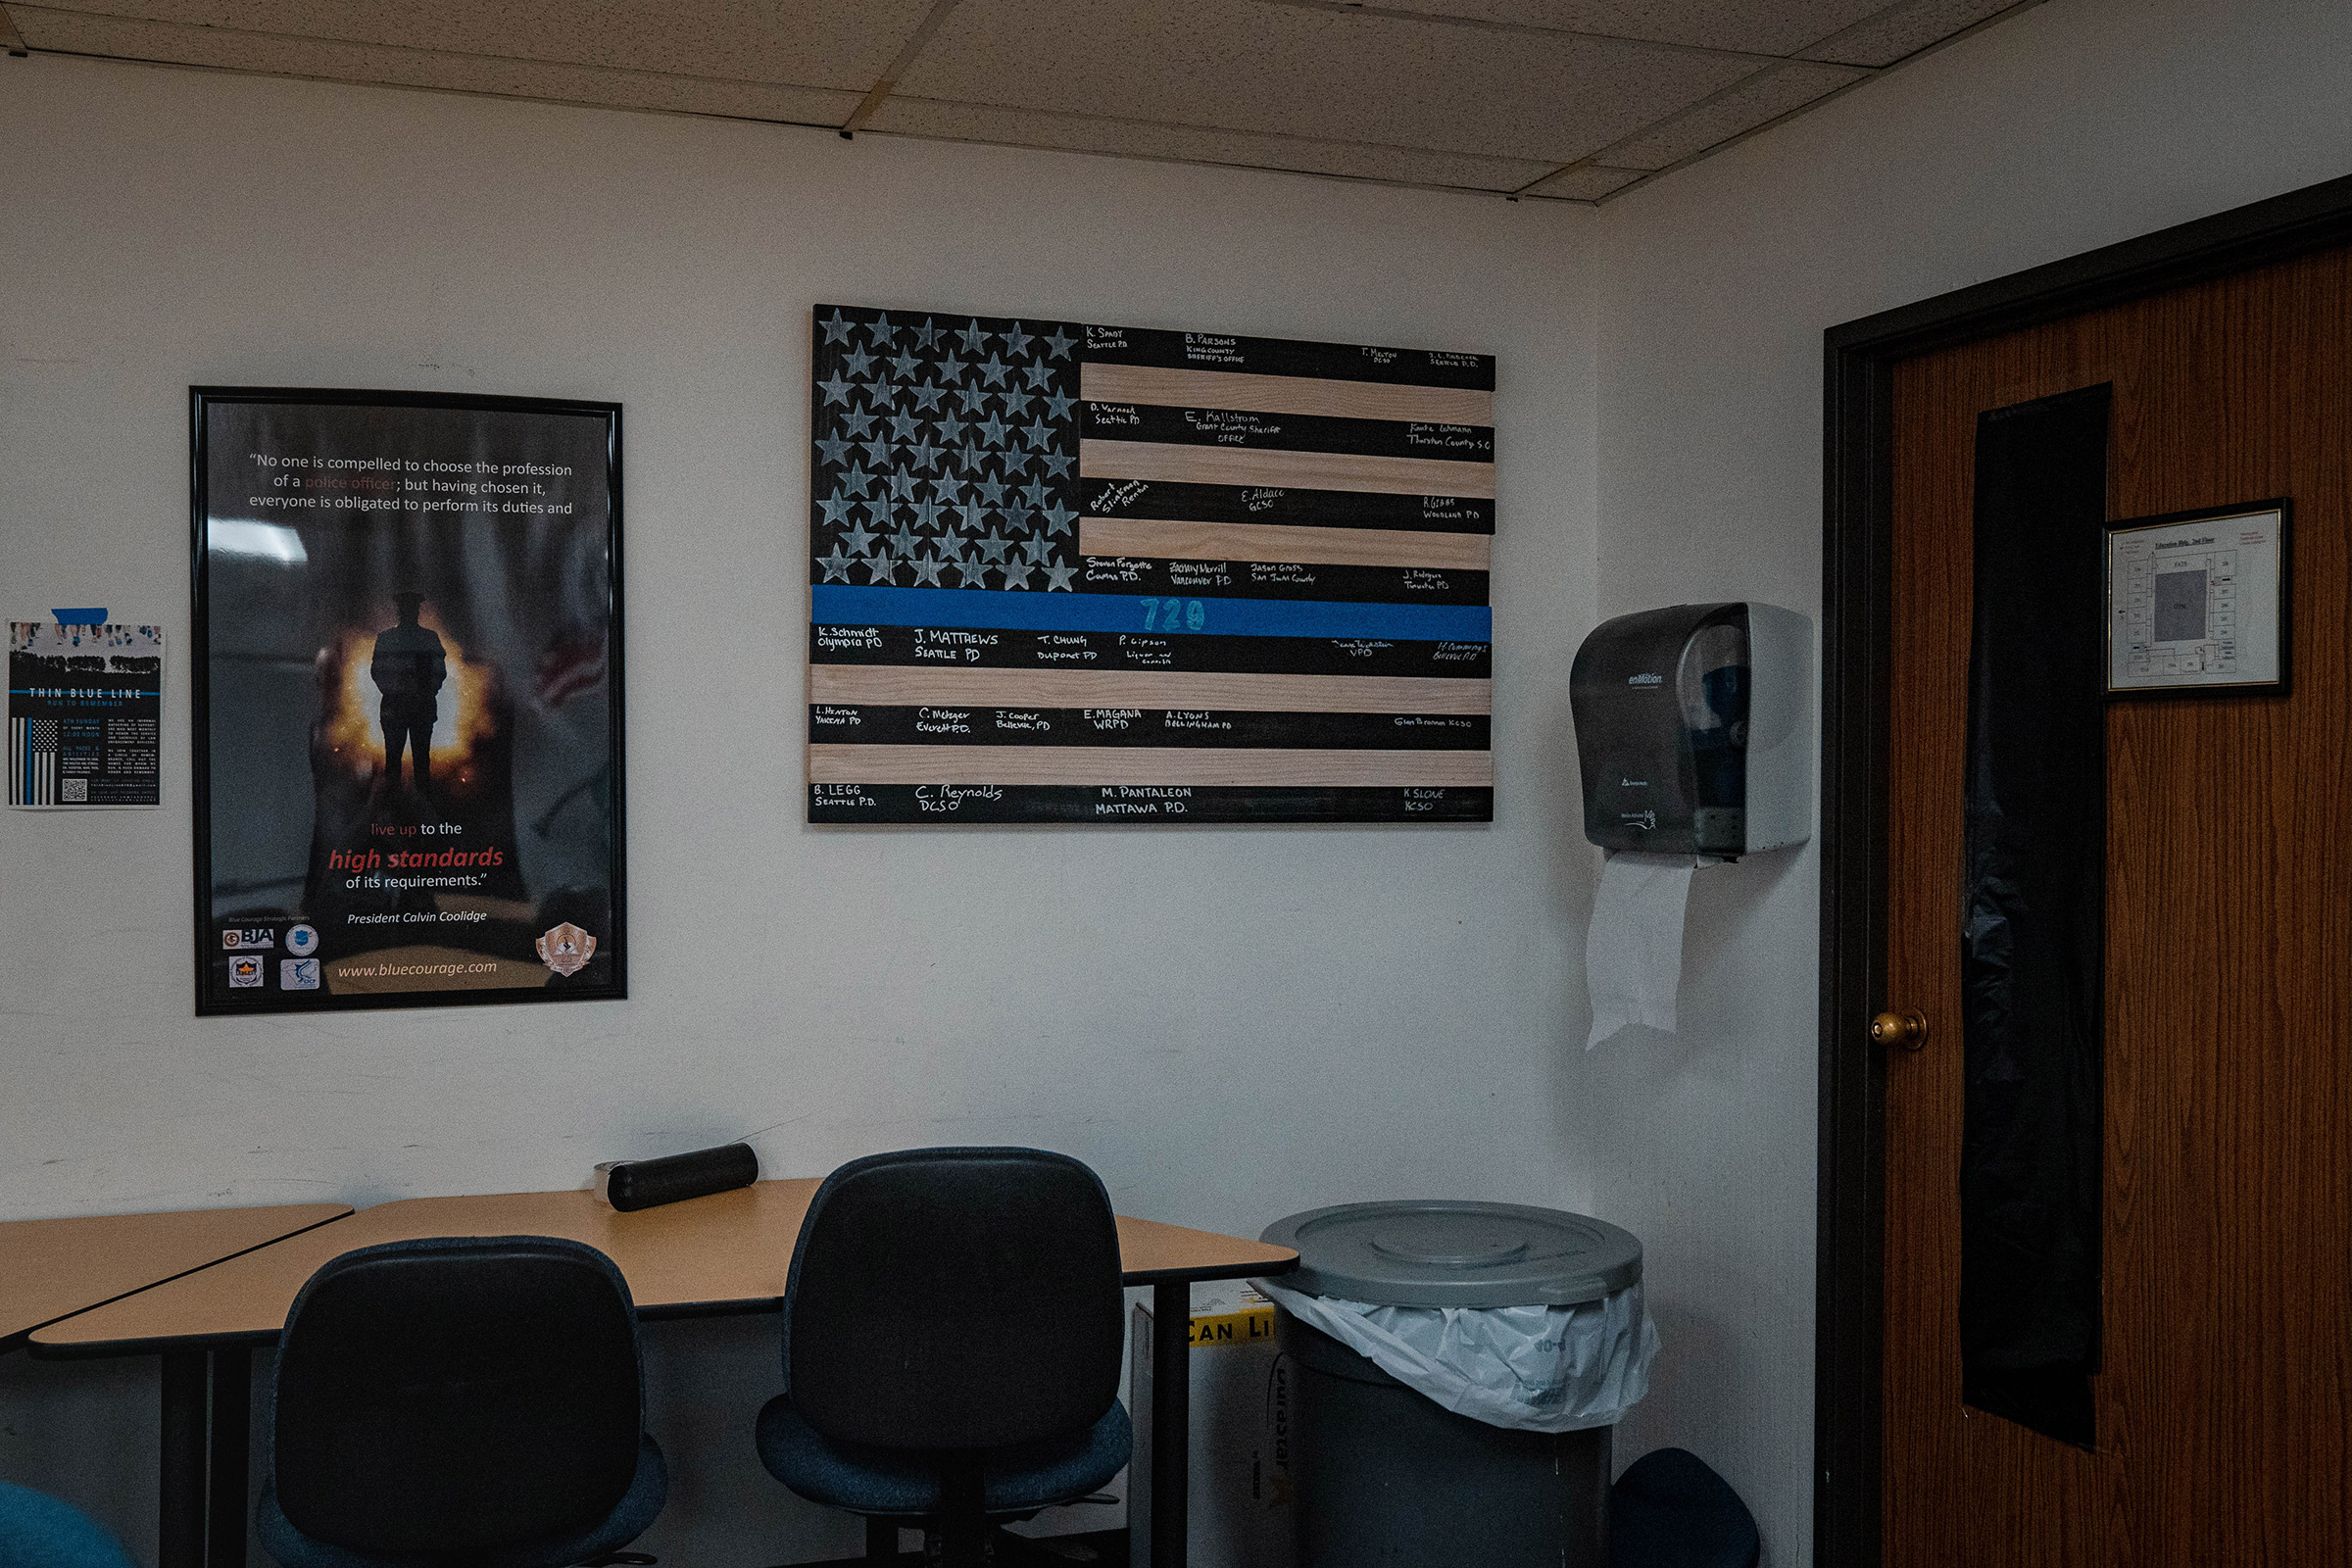 A thin blue line flag poster on display in an out-of-use classroom. (Jovelle Tamayo for TIME)